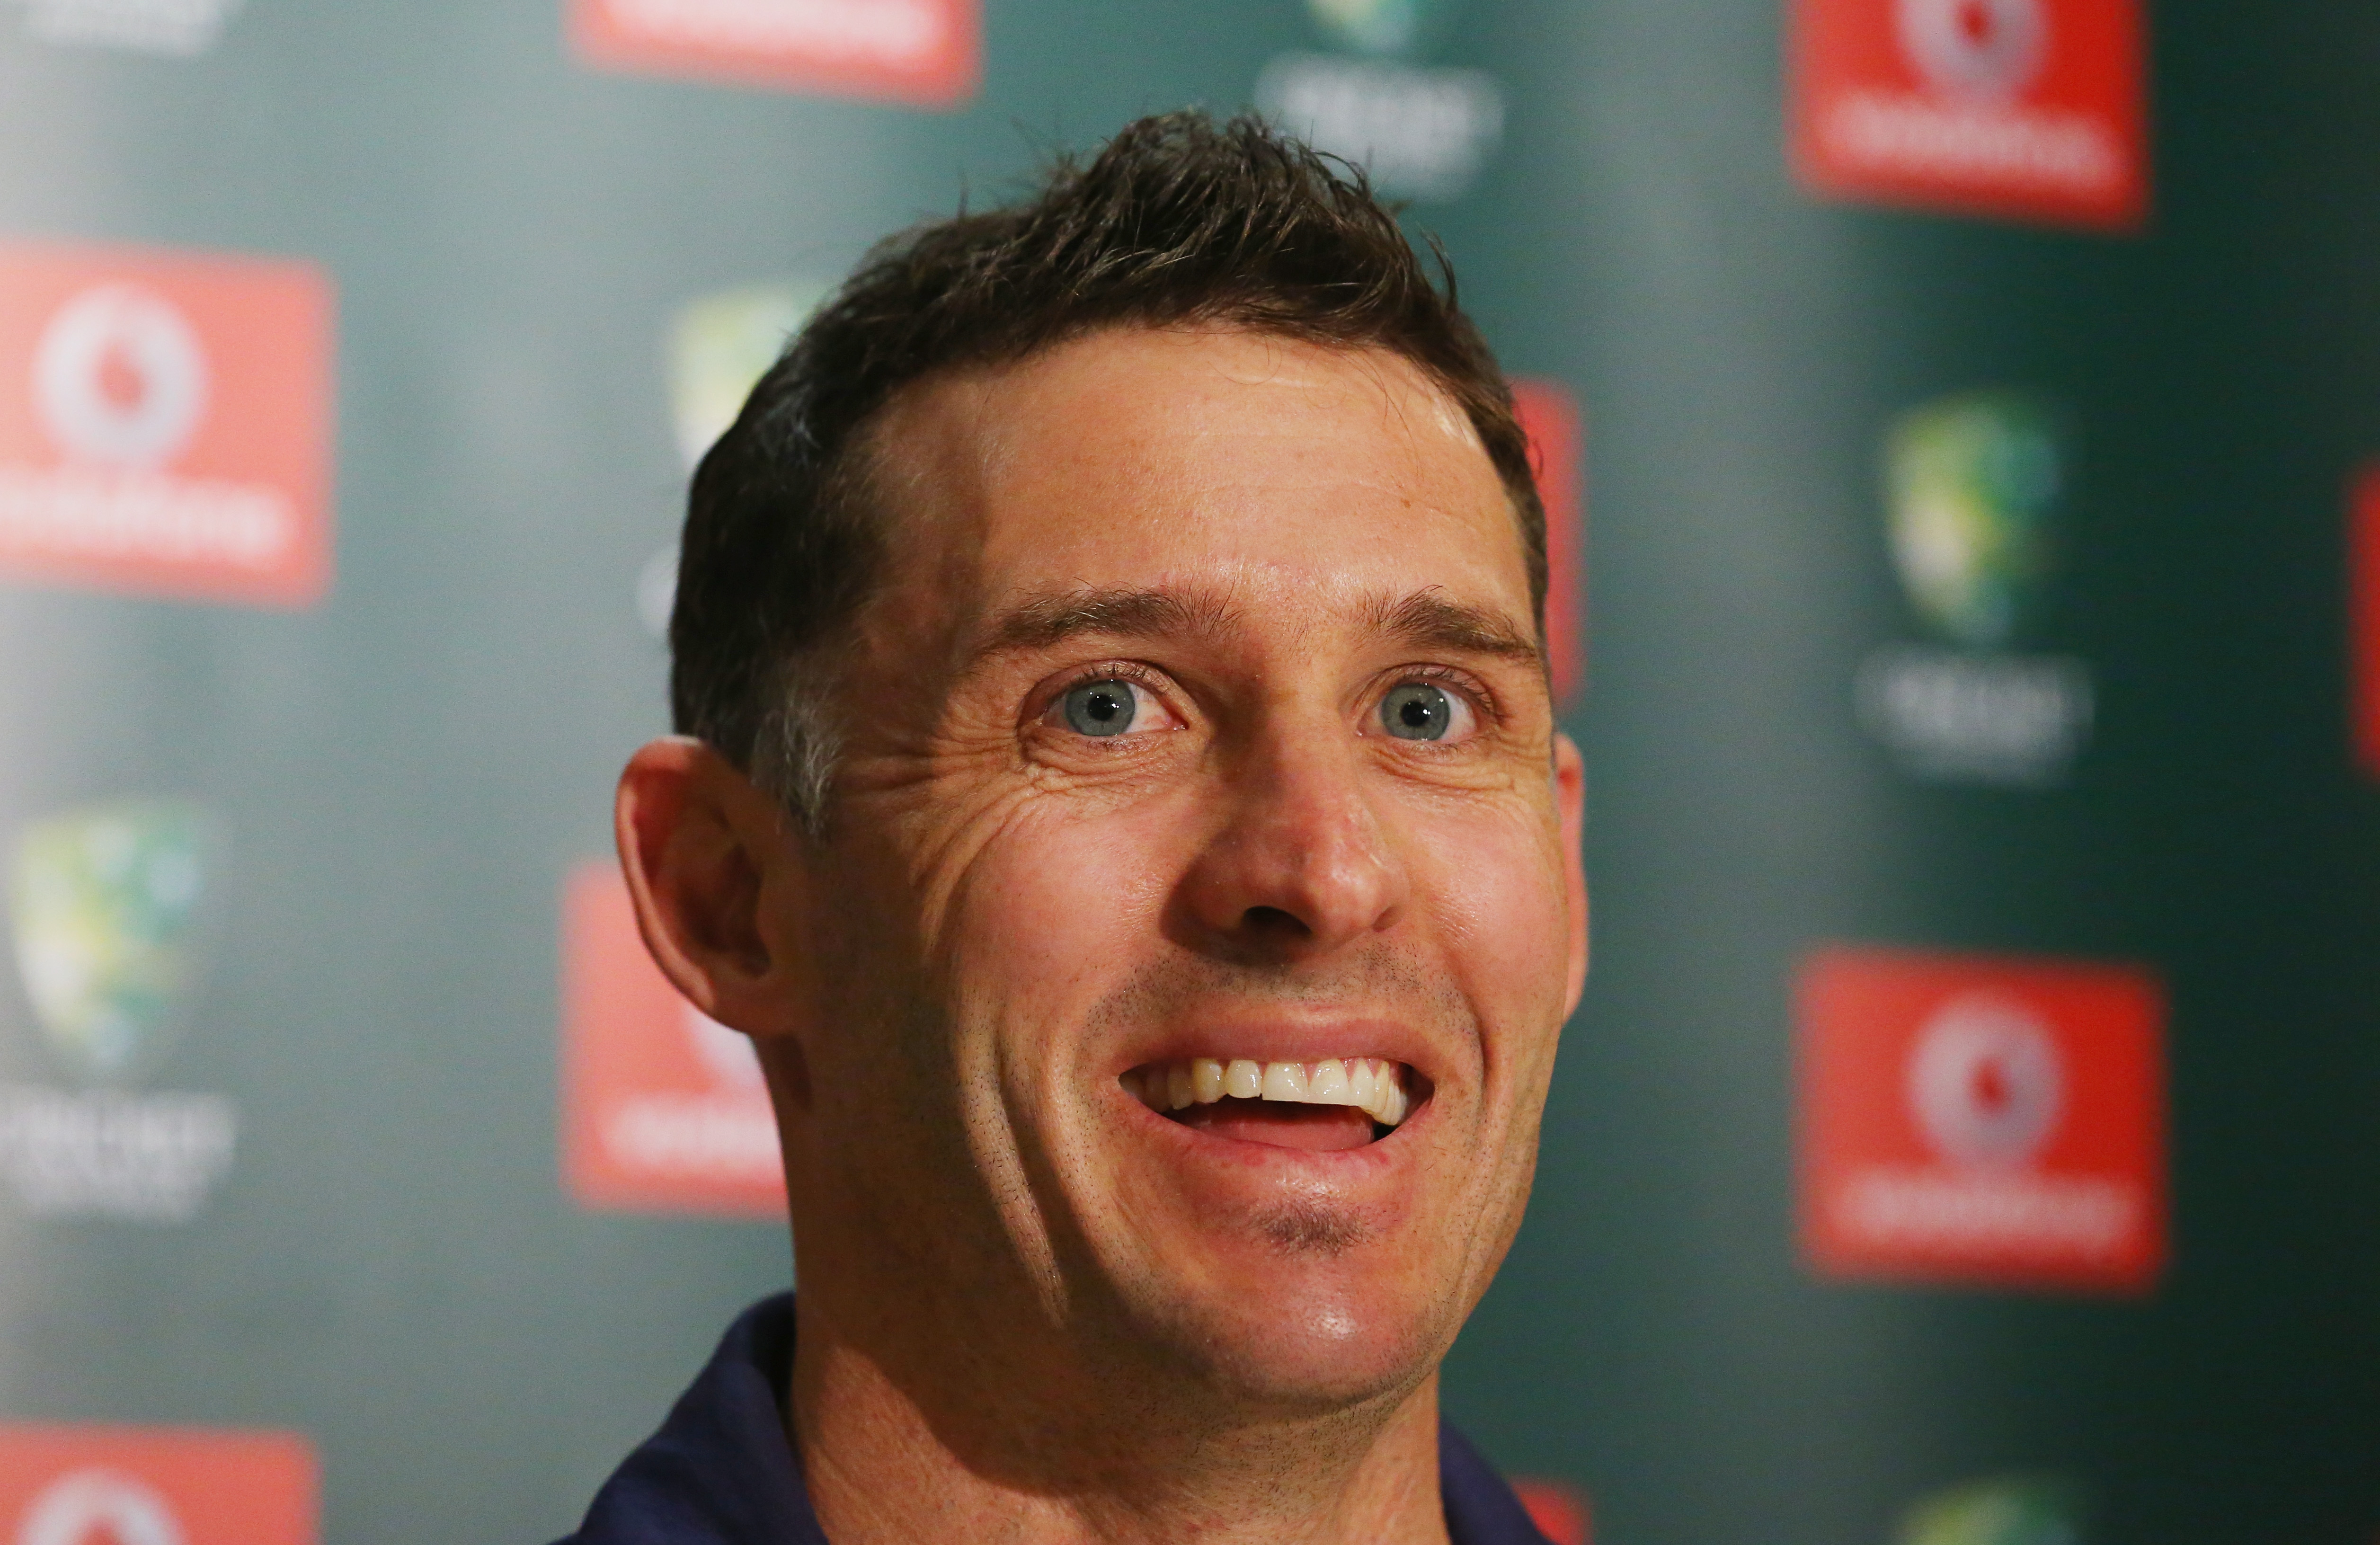 Mike Hussey joins Australia team as mentor for Sri Lanka and Pakistan T20 series